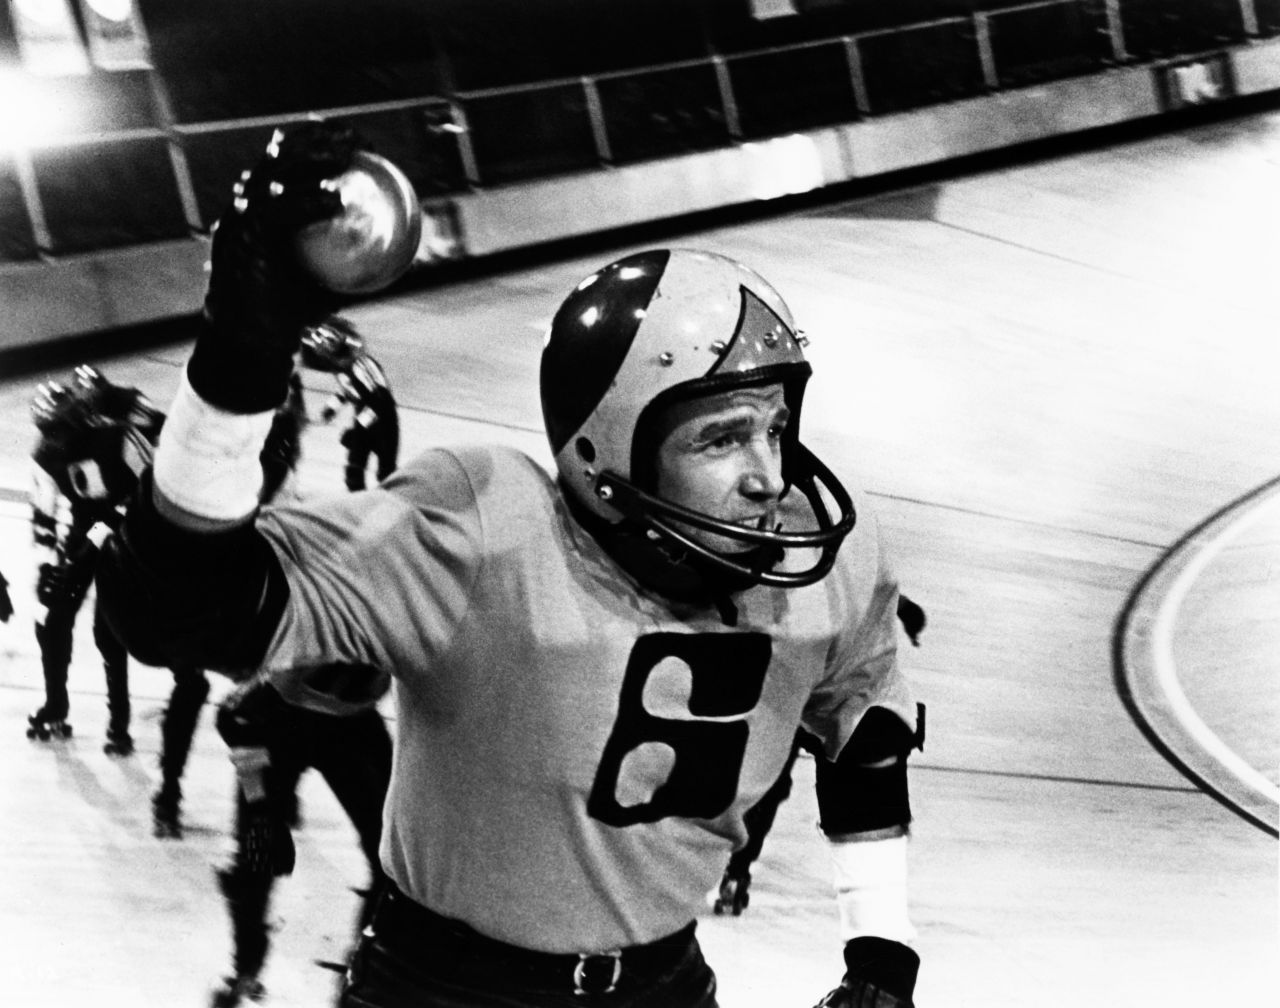 "Rollerball" (1975) stars James Caan as an elite athlete in 2018. Corporations run the world, and everything is calm and luxurious -- except the sport of Rollerball, which lets the public vent its bloodlust. They love Caan's character, but the ruling executives aren't fond of his individualism.